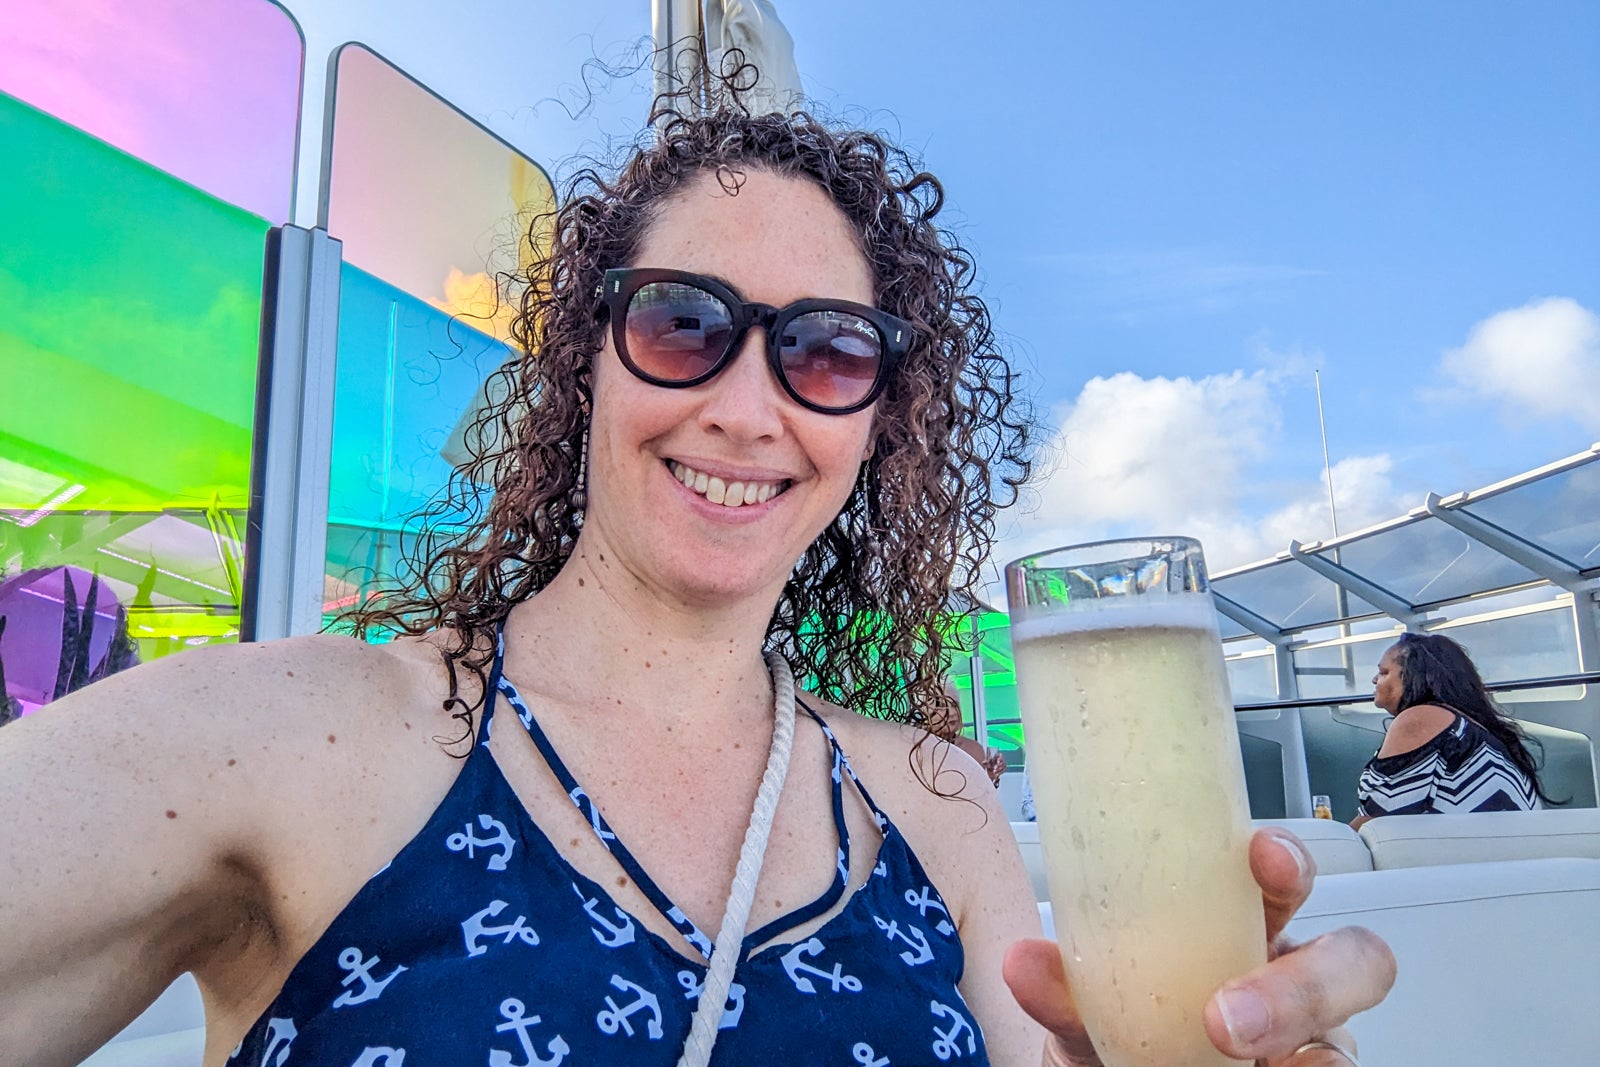 Woman in sunglasses and blue top with anchors drinking champagne